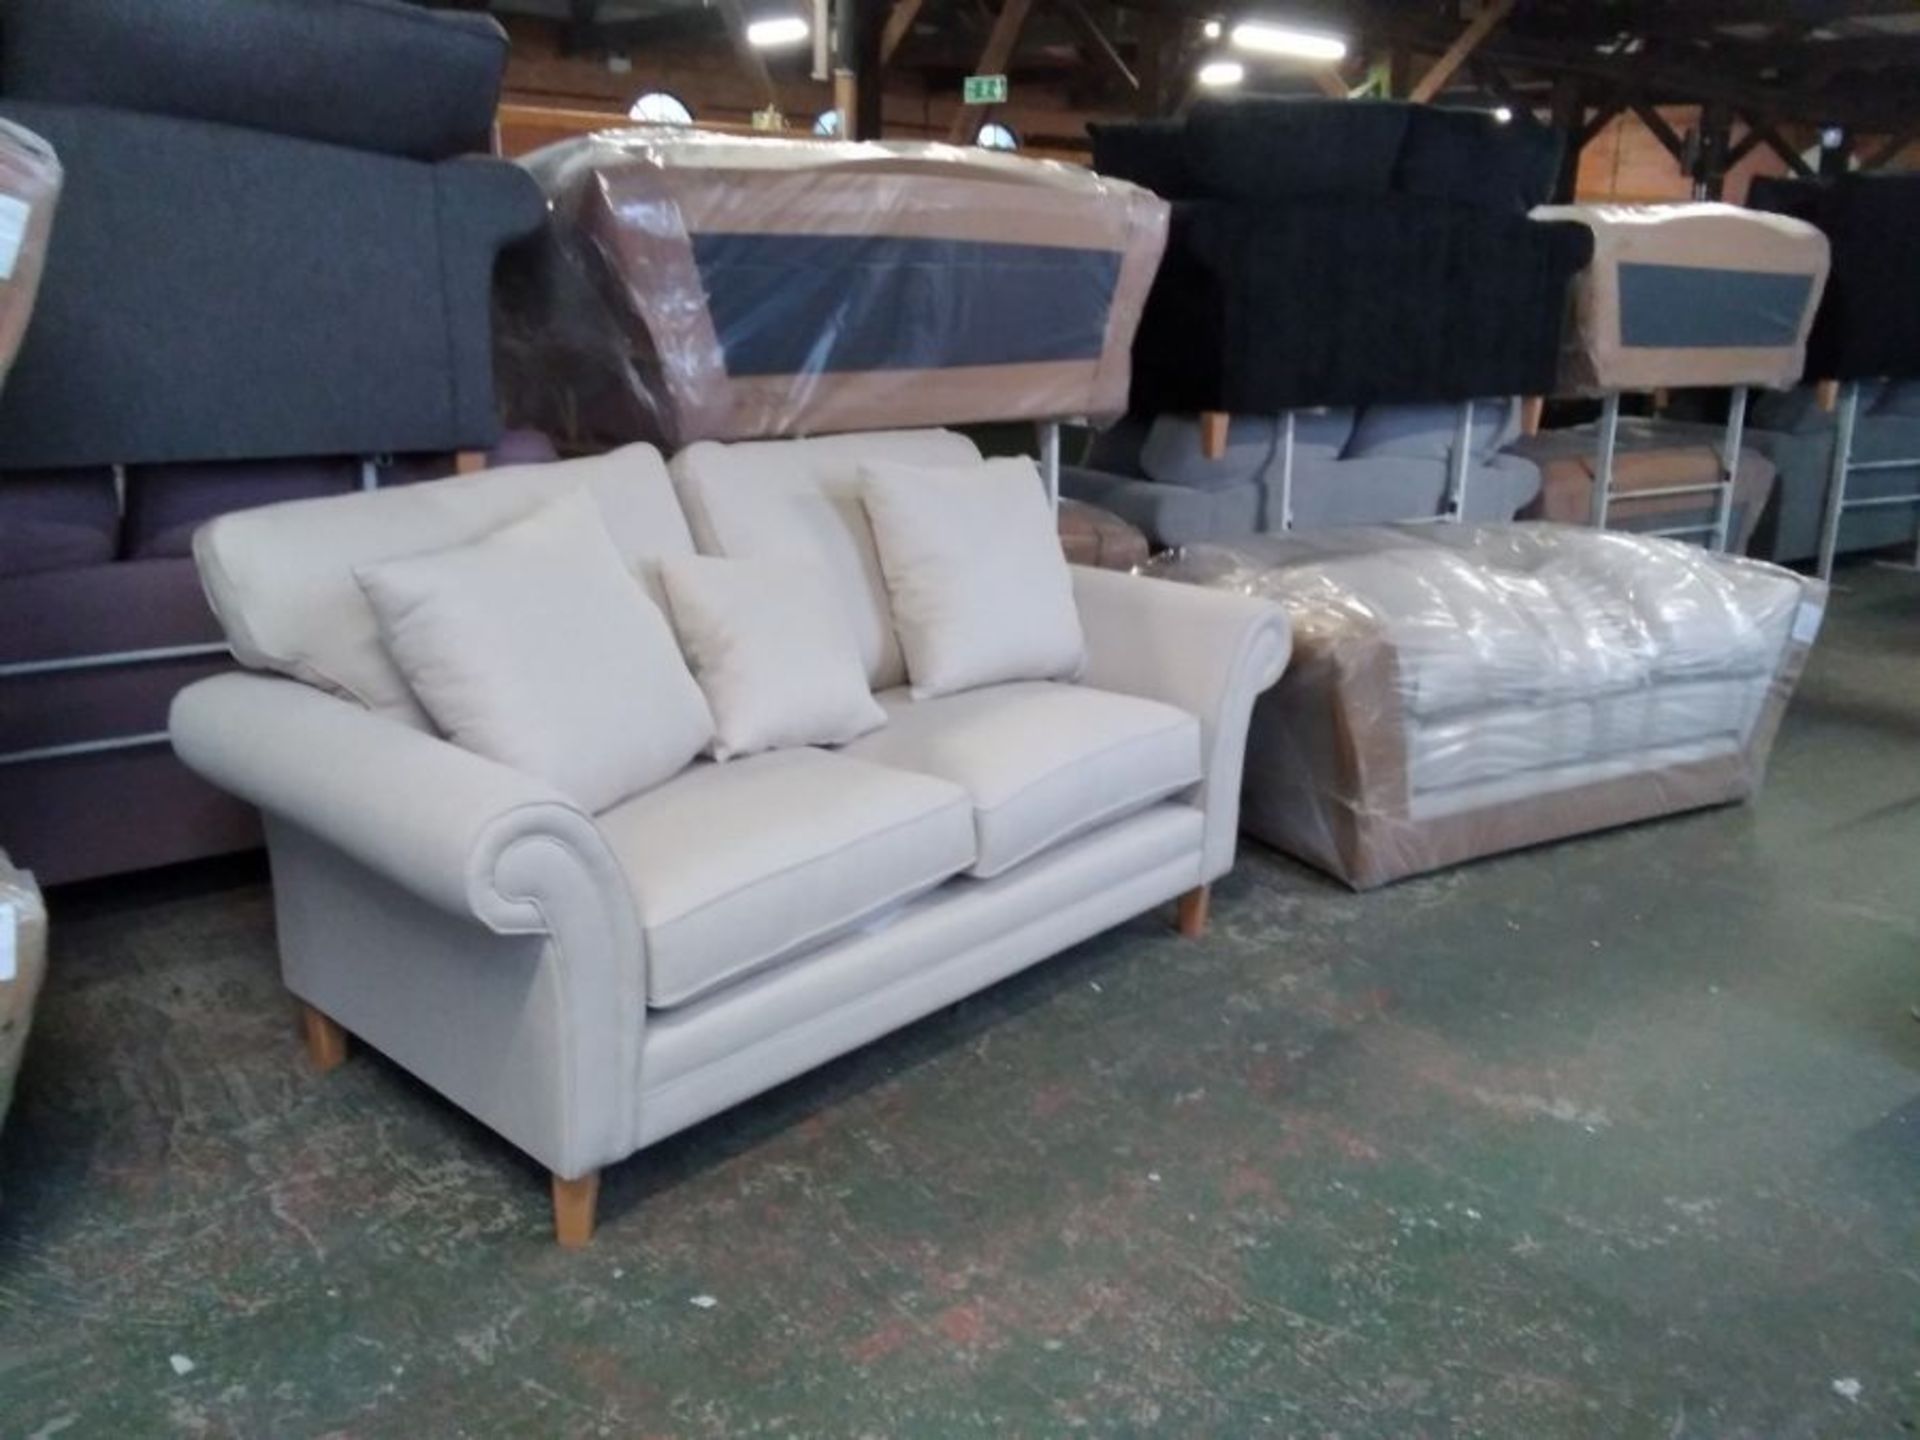 EX SHOWROOM MOSTA AOSTA NATURAL 3 SEATER AND 2 SE